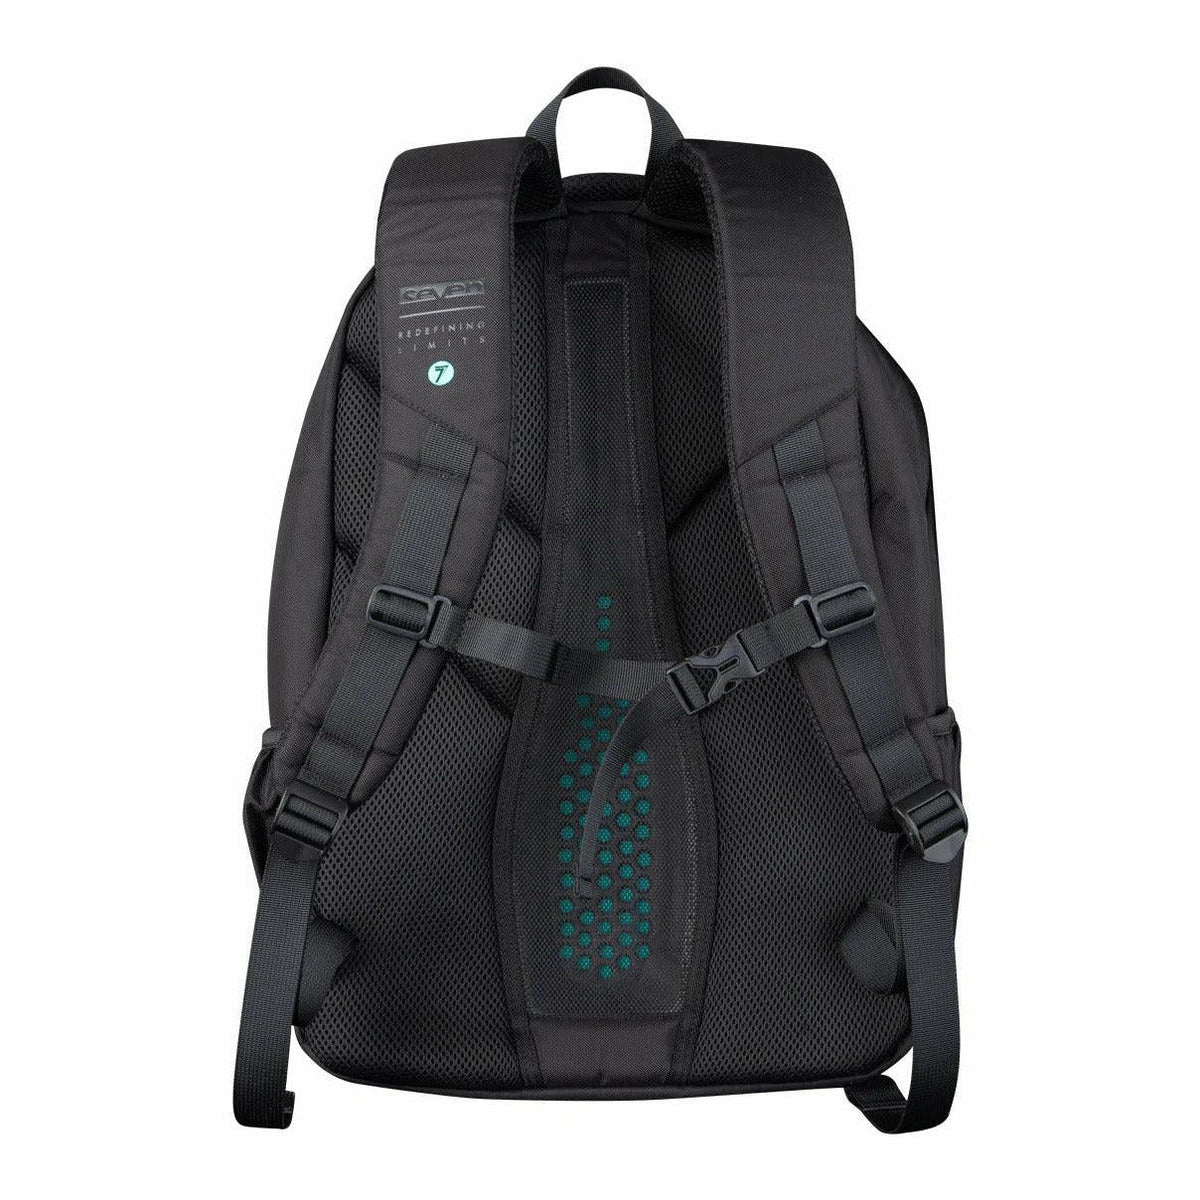 SEVEN-ACADEMY-BACKPACK - BACKPACK - Synik Clothing - synikclothing.com